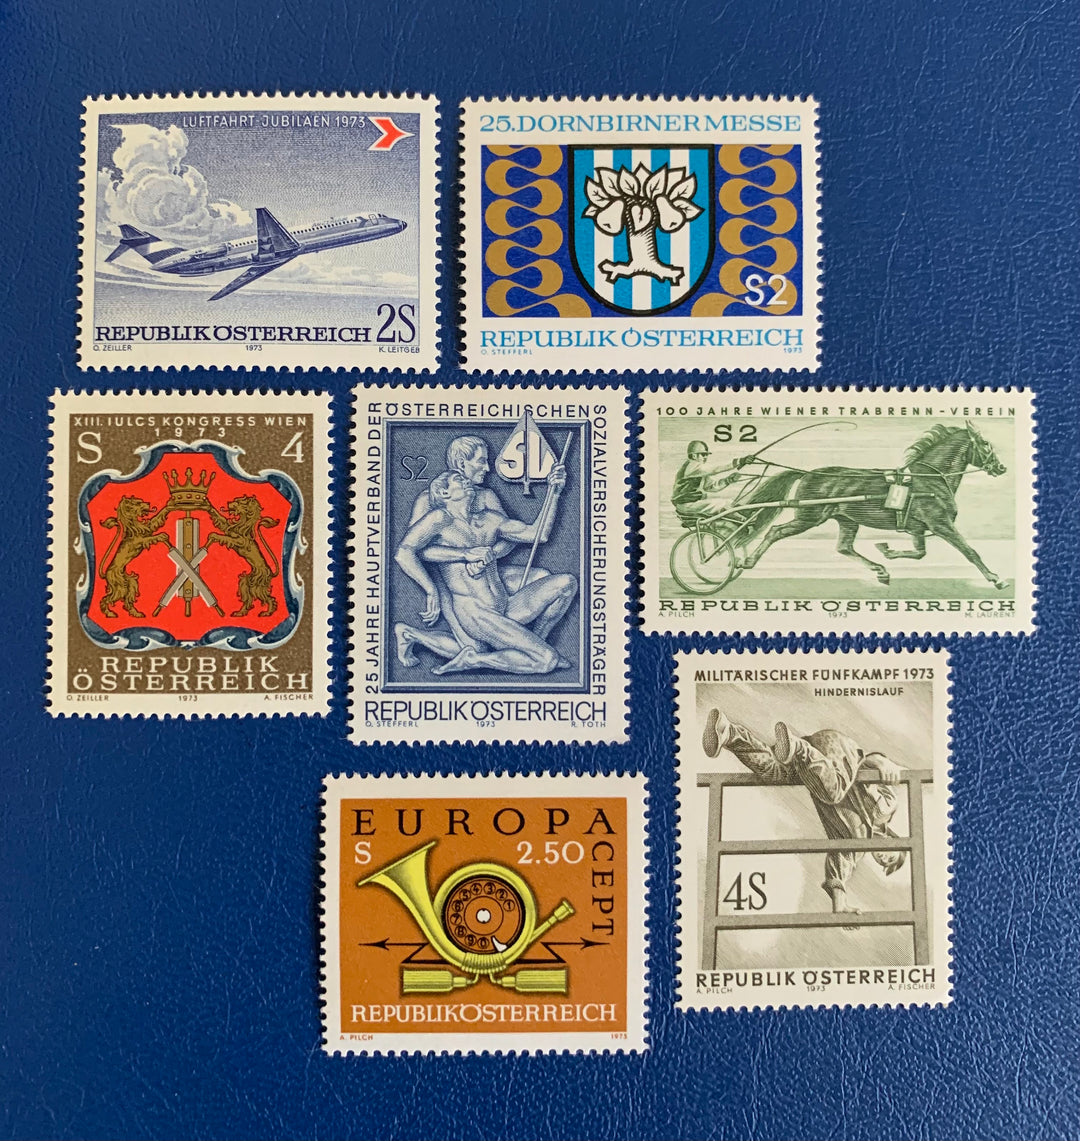 Austria - Original Vintage Postage Stamps - 1973 Mix- for the collector, artist or crafter - scrapbooks, decoupage, journals